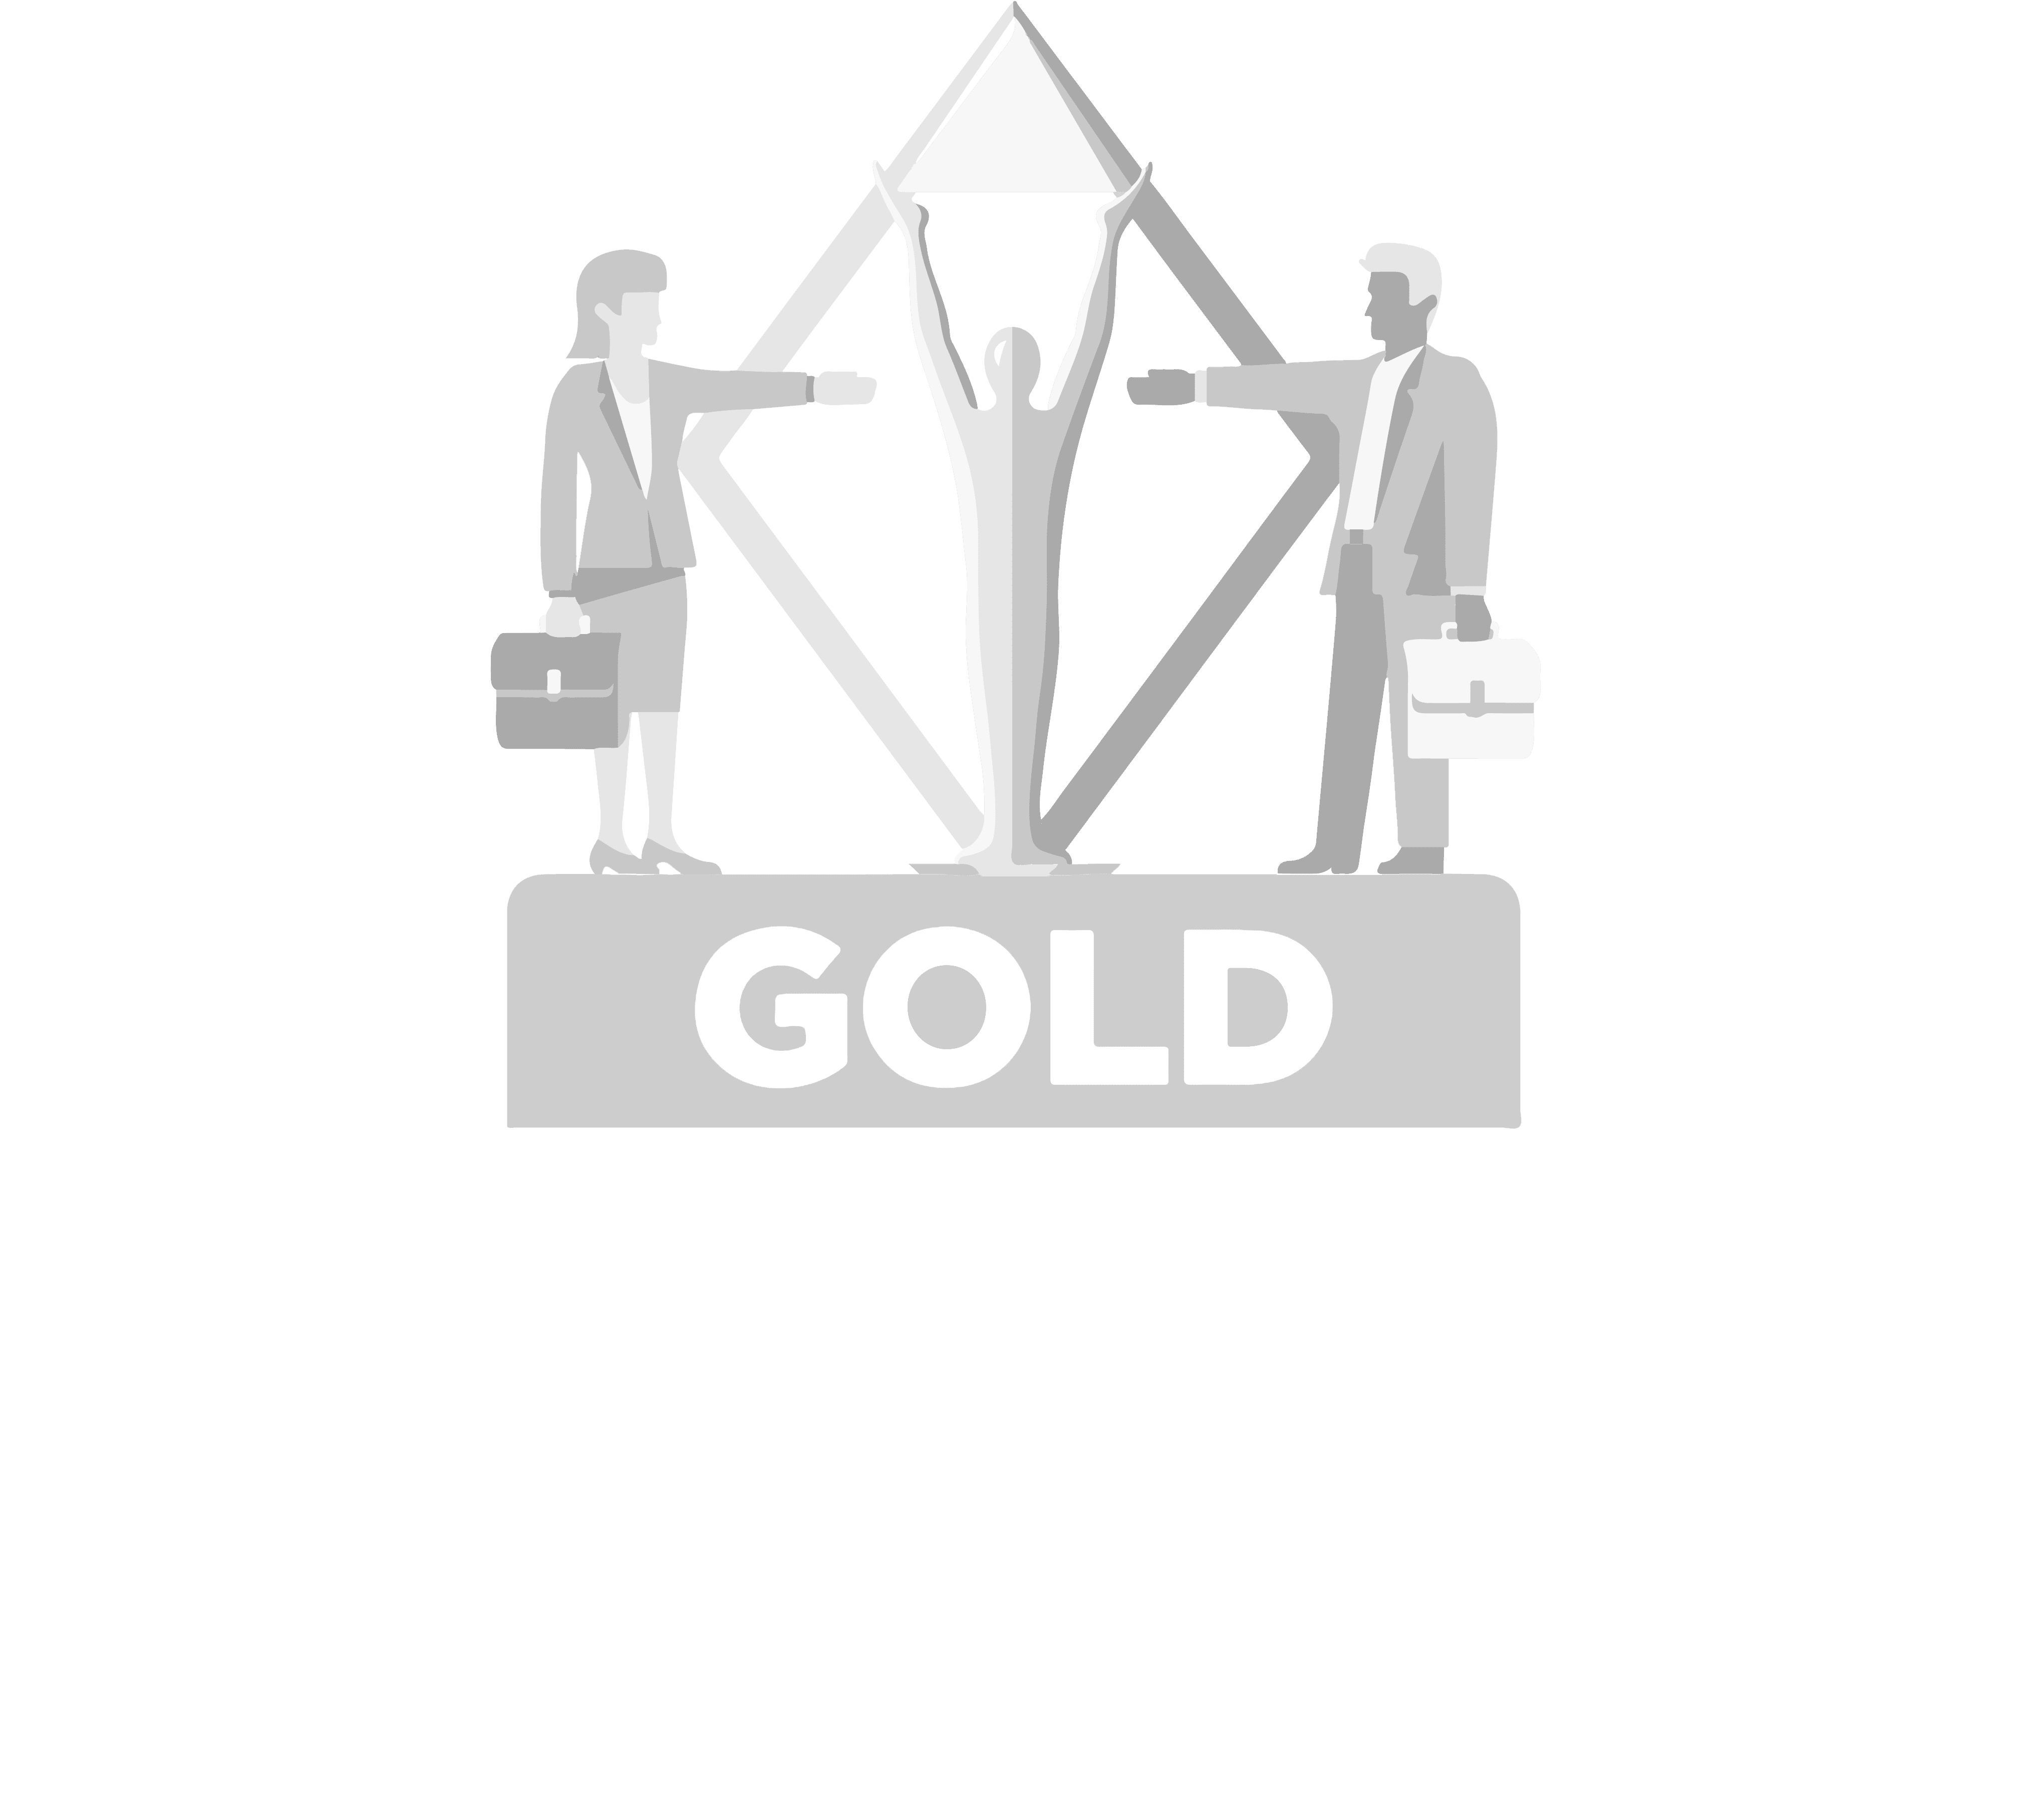 ttas-trusted-and-recognized-2020-stevie-award (1)